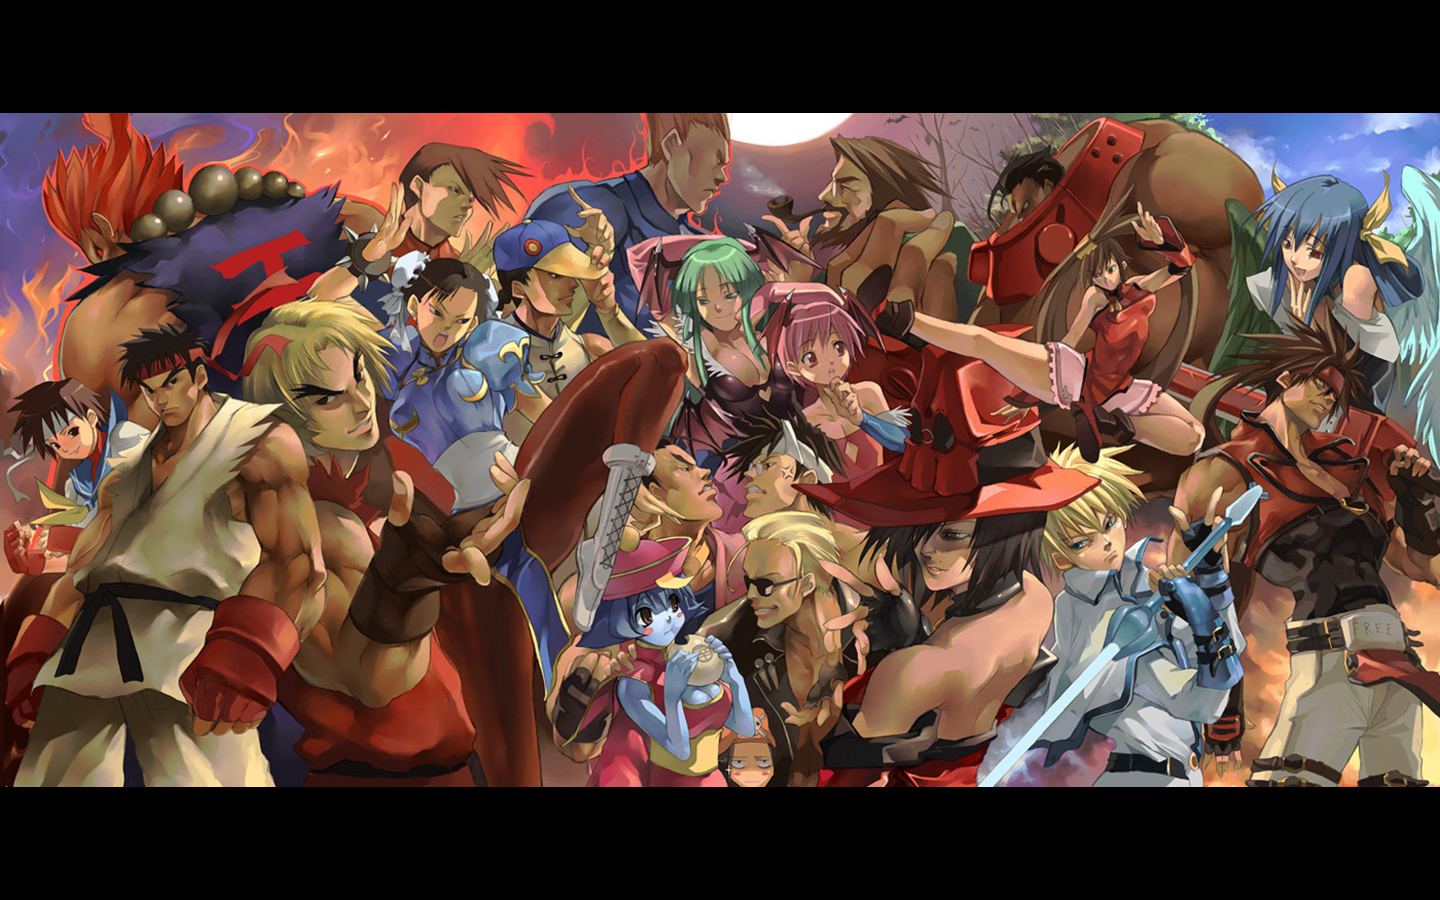 236 Street Fighter HD Wallpapers | Backgrounds - Wallpaper Abyss